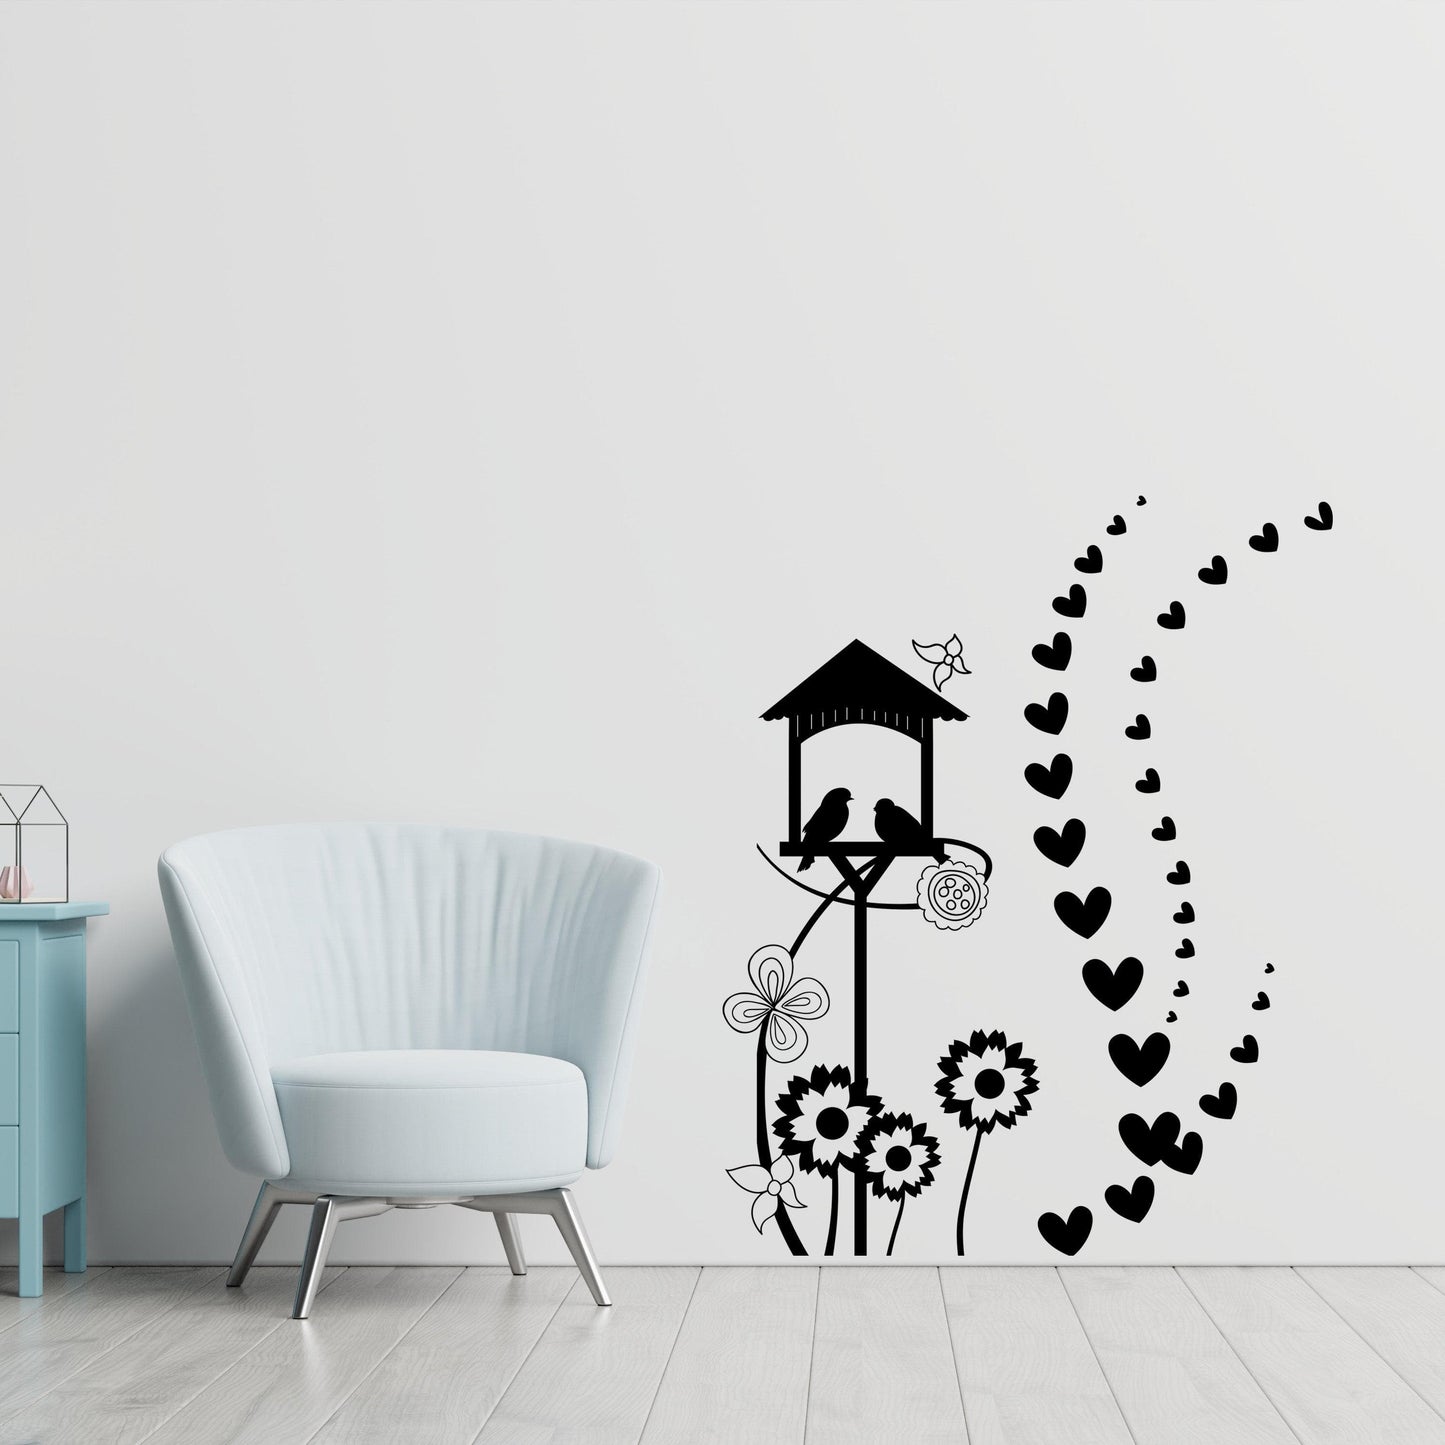 Birdhouse Wall Decal. Flowers and Hearts Design. Laundry Room / Nursery / Bedroom / Living Room Home Decor. #1036